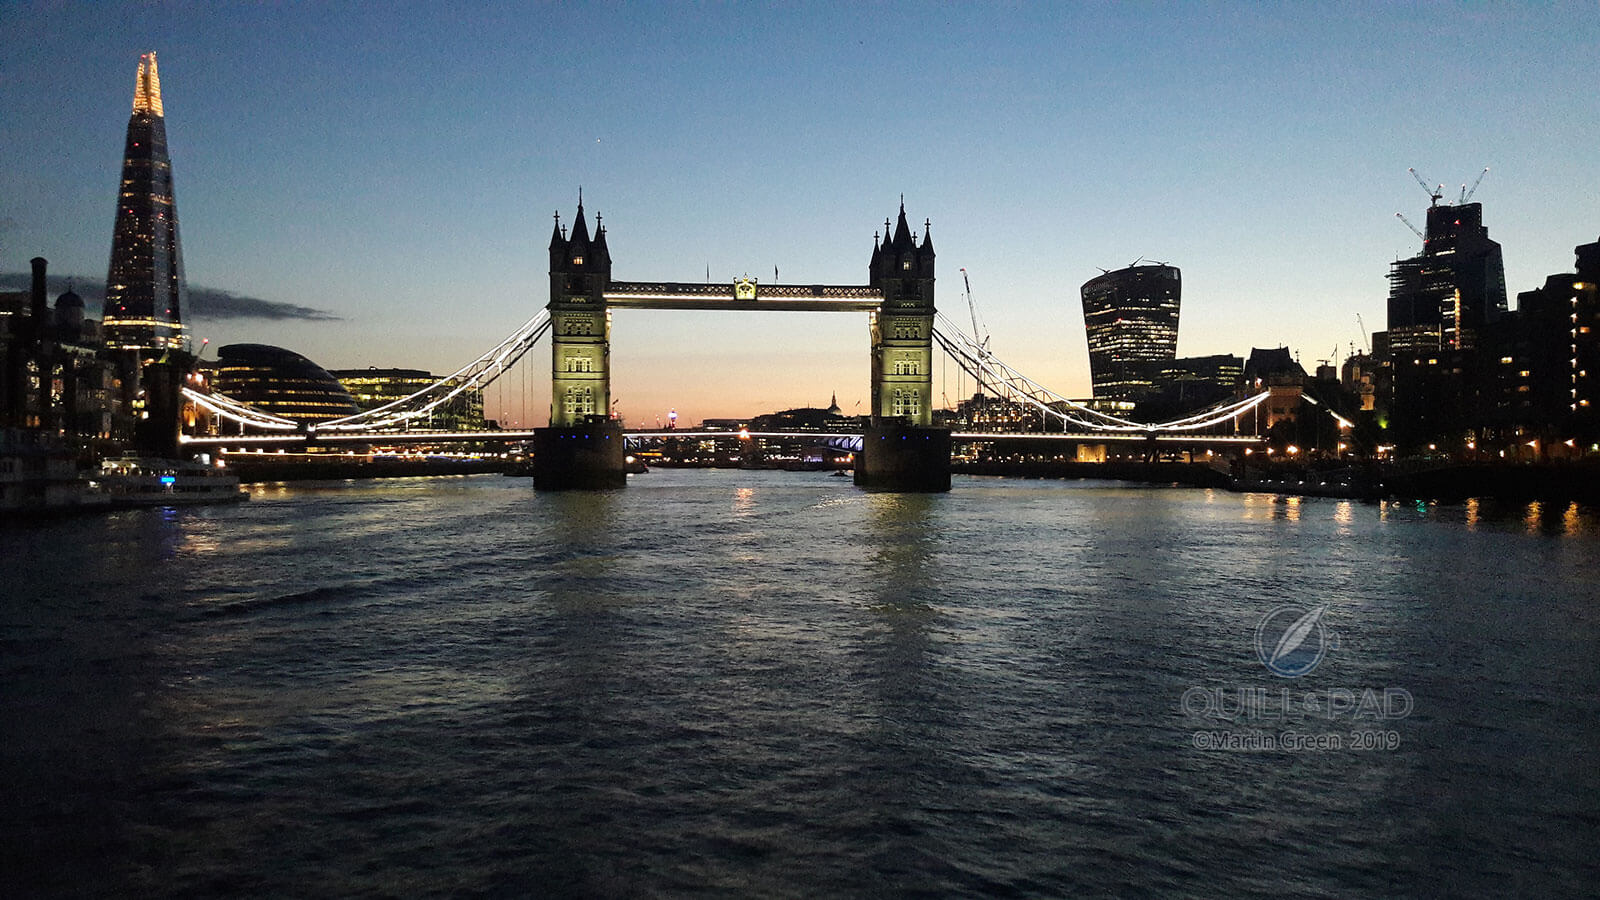 View of Tower Bridge from the Thames